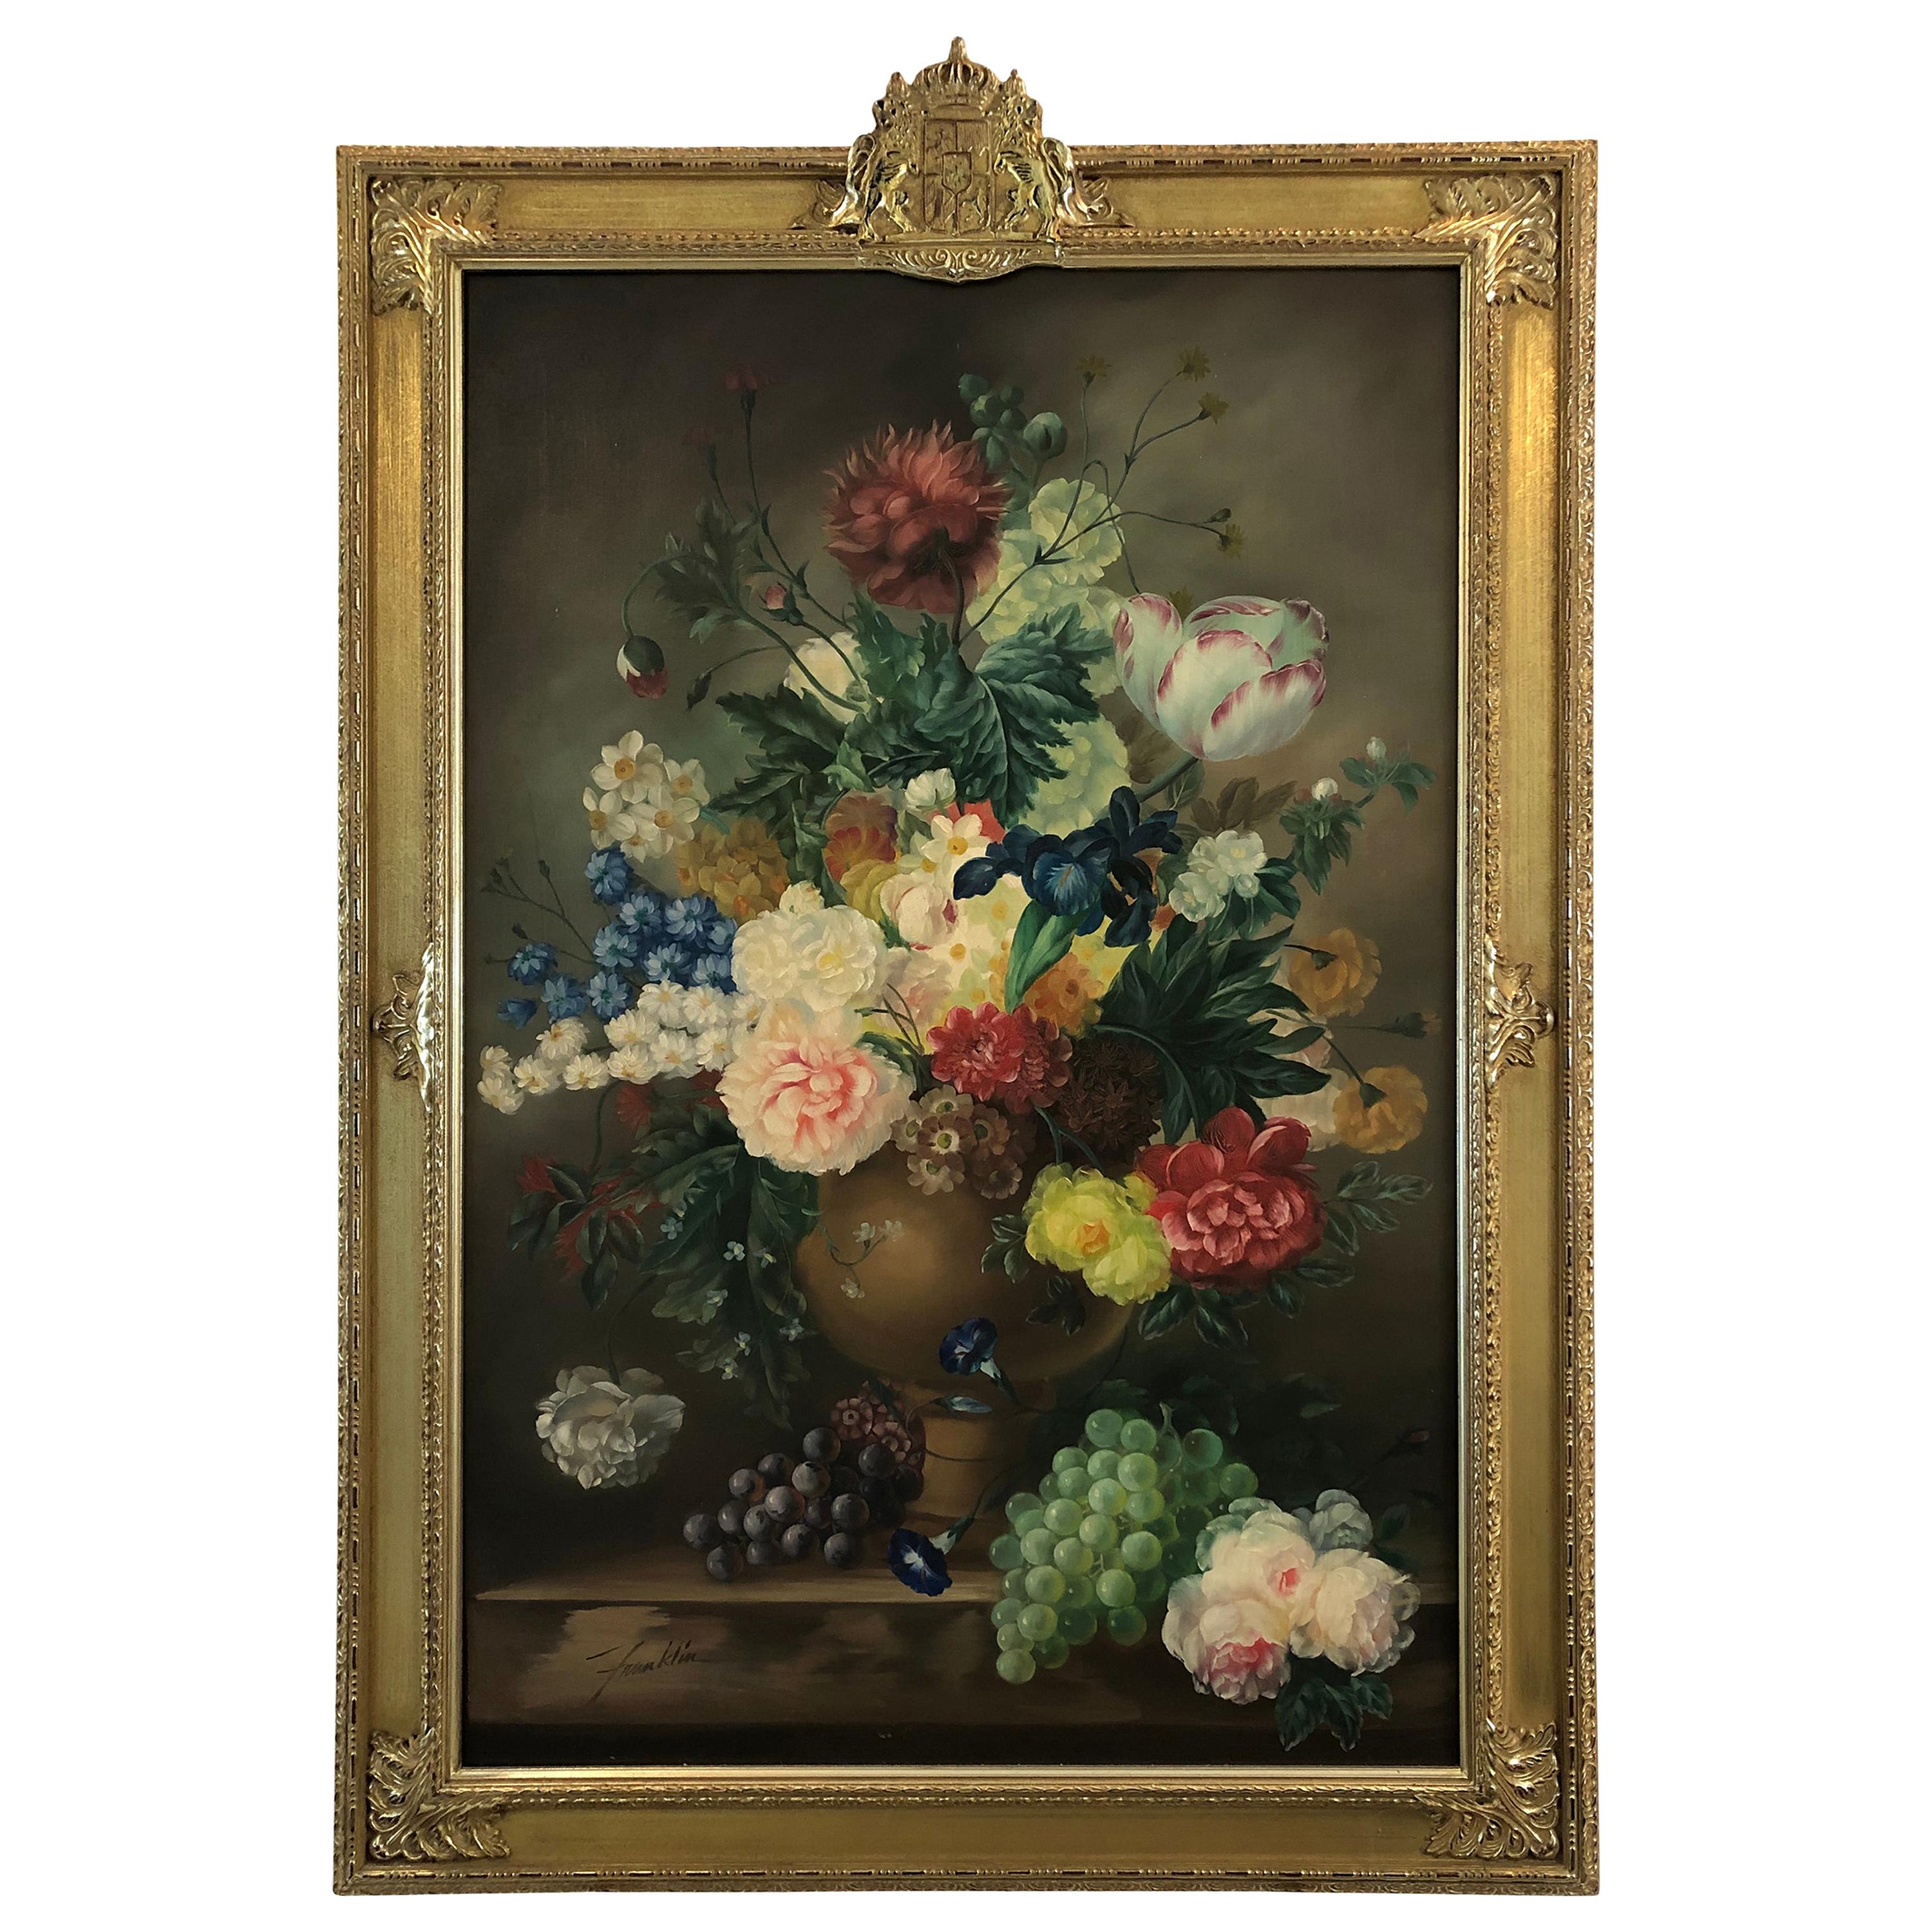 Large Romantic Floral Still Life in Magnificent Gilded Frame